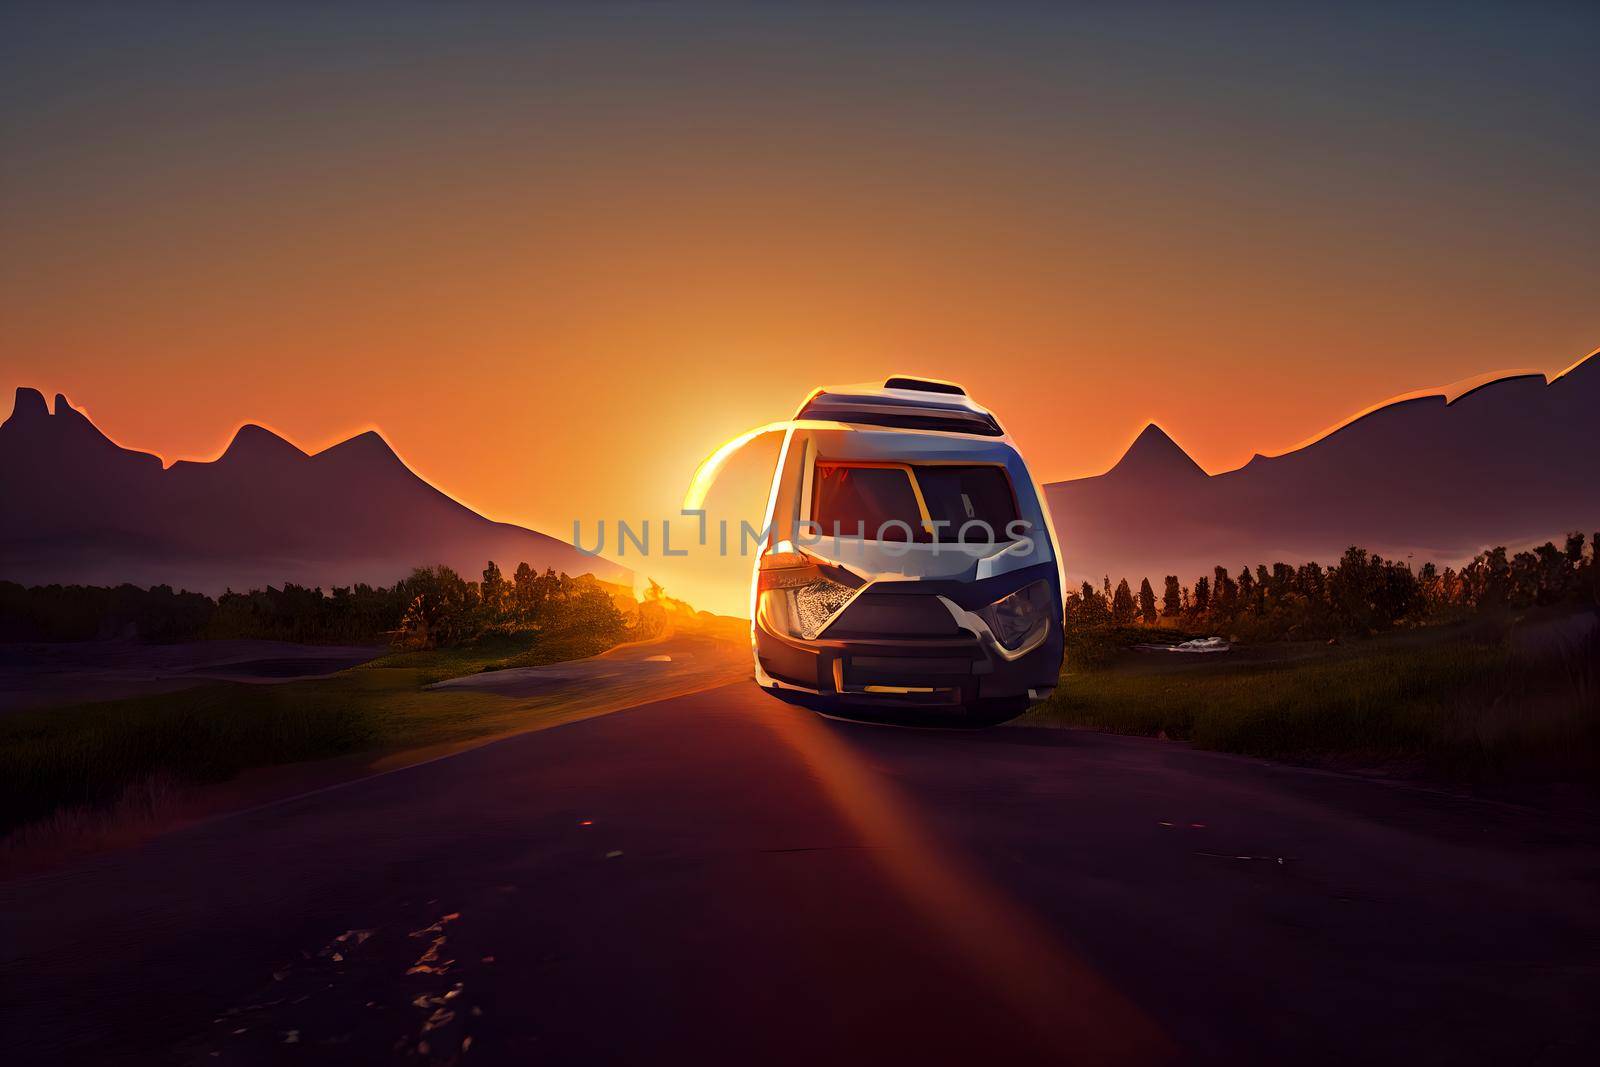 Travel van driving on sunset background. Camping car on the road. Cartoon style travel concept, neural network generated art by z1b